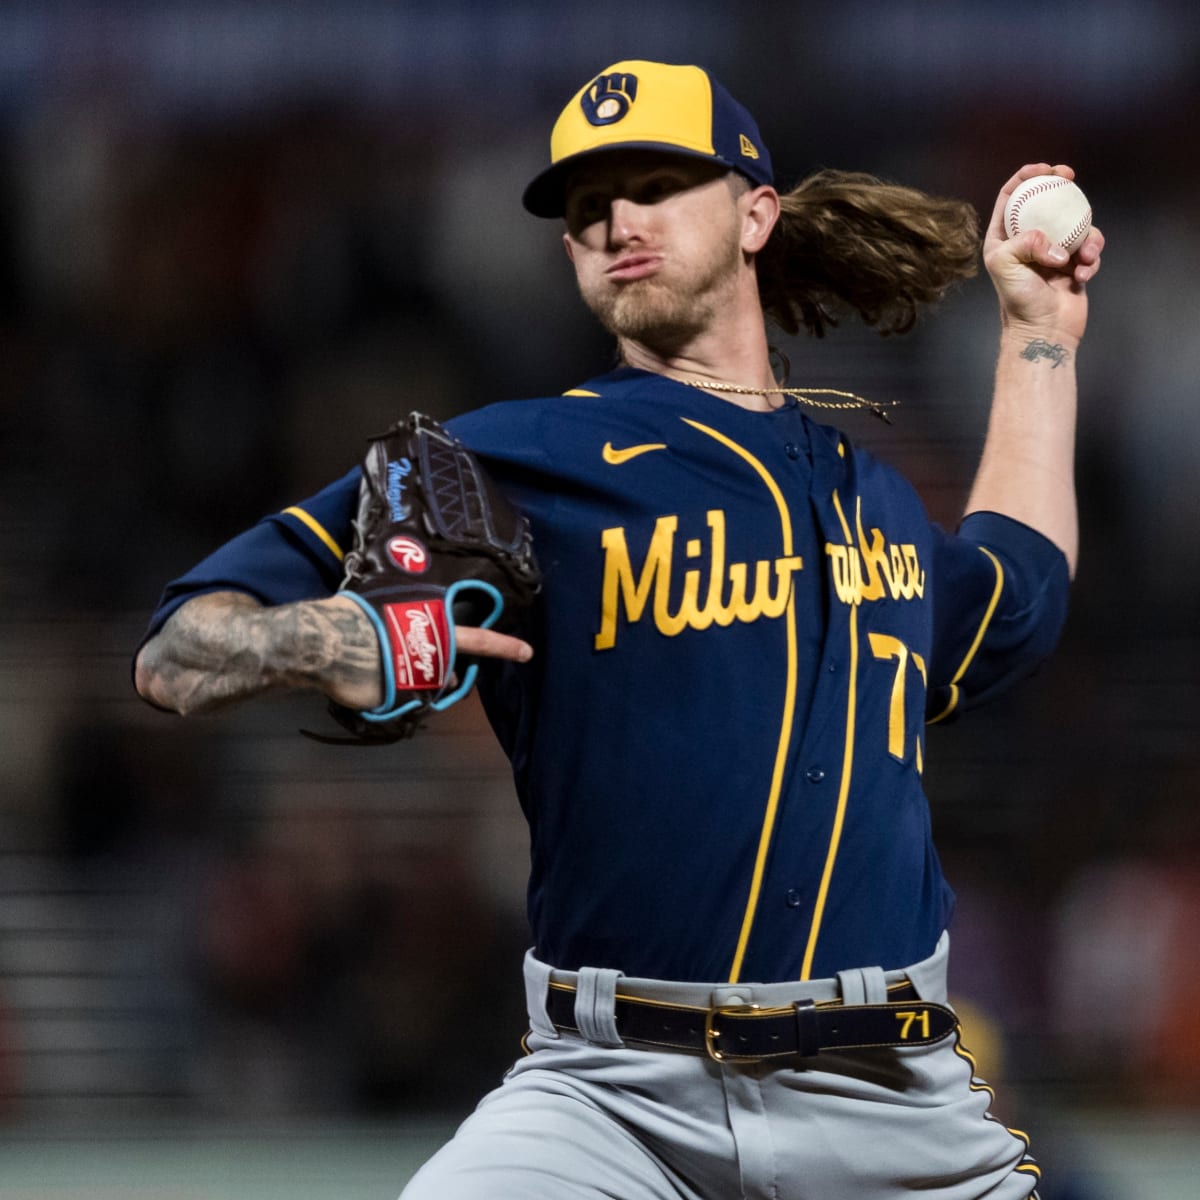 Brewers closer Josh Hader remains on family medical leave